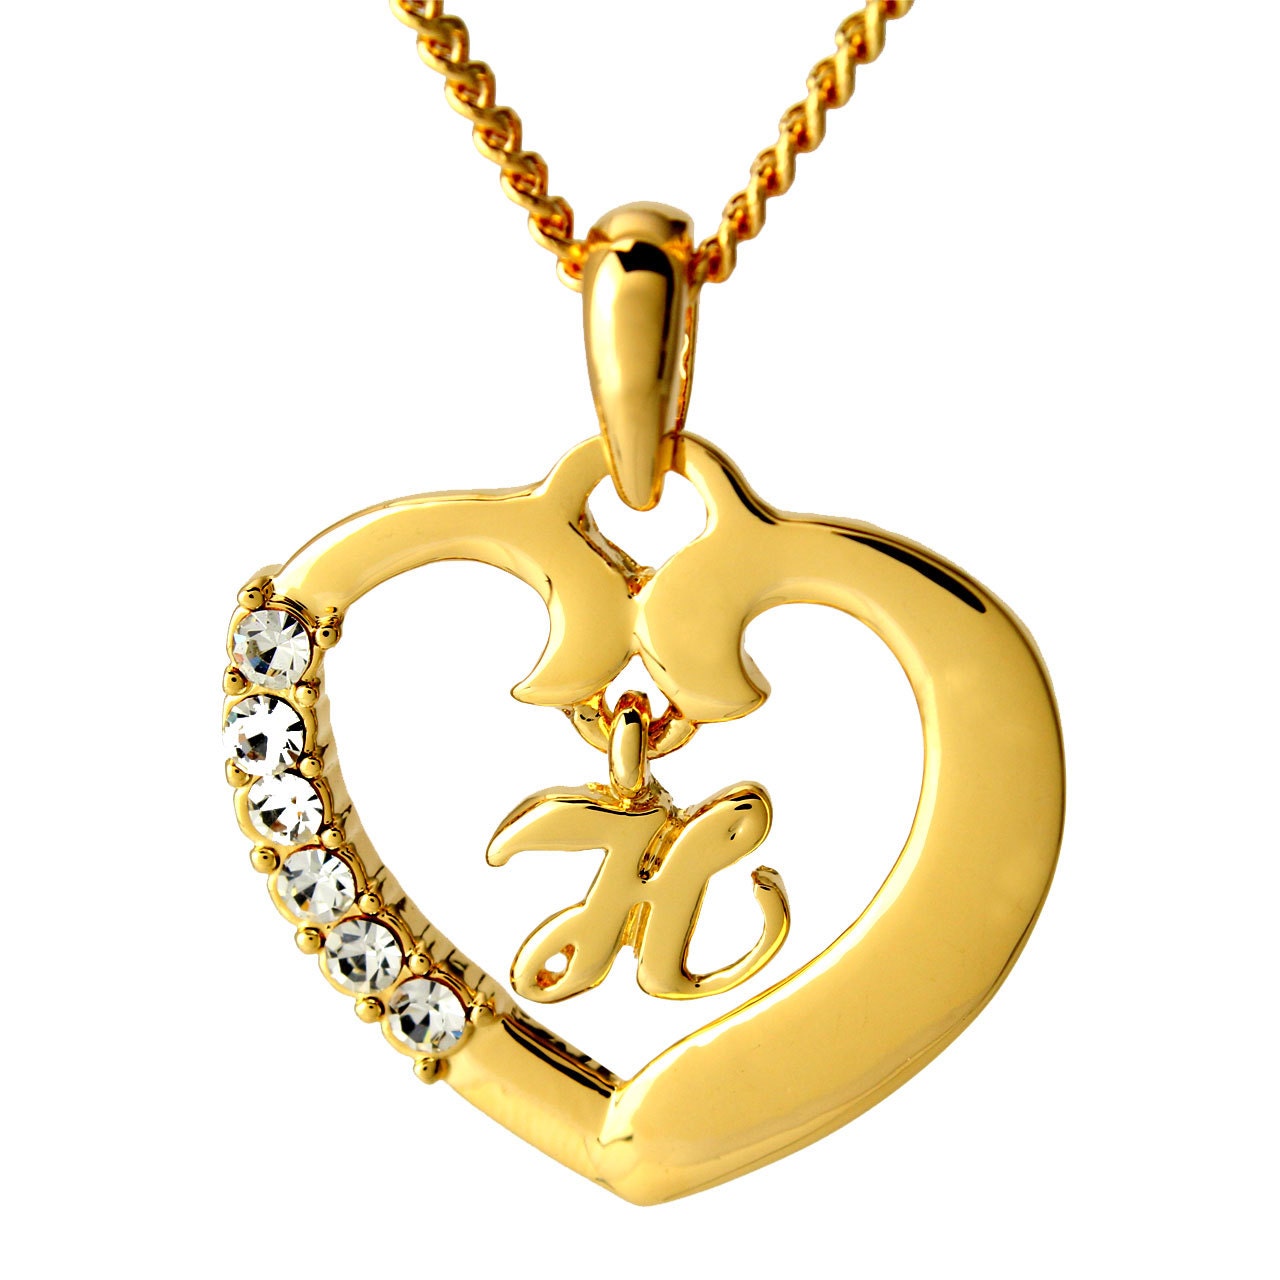 INITIAL HEART NECKLACE Letter 'P' 18k Gold Plated Birthday/Christmas Gifts 